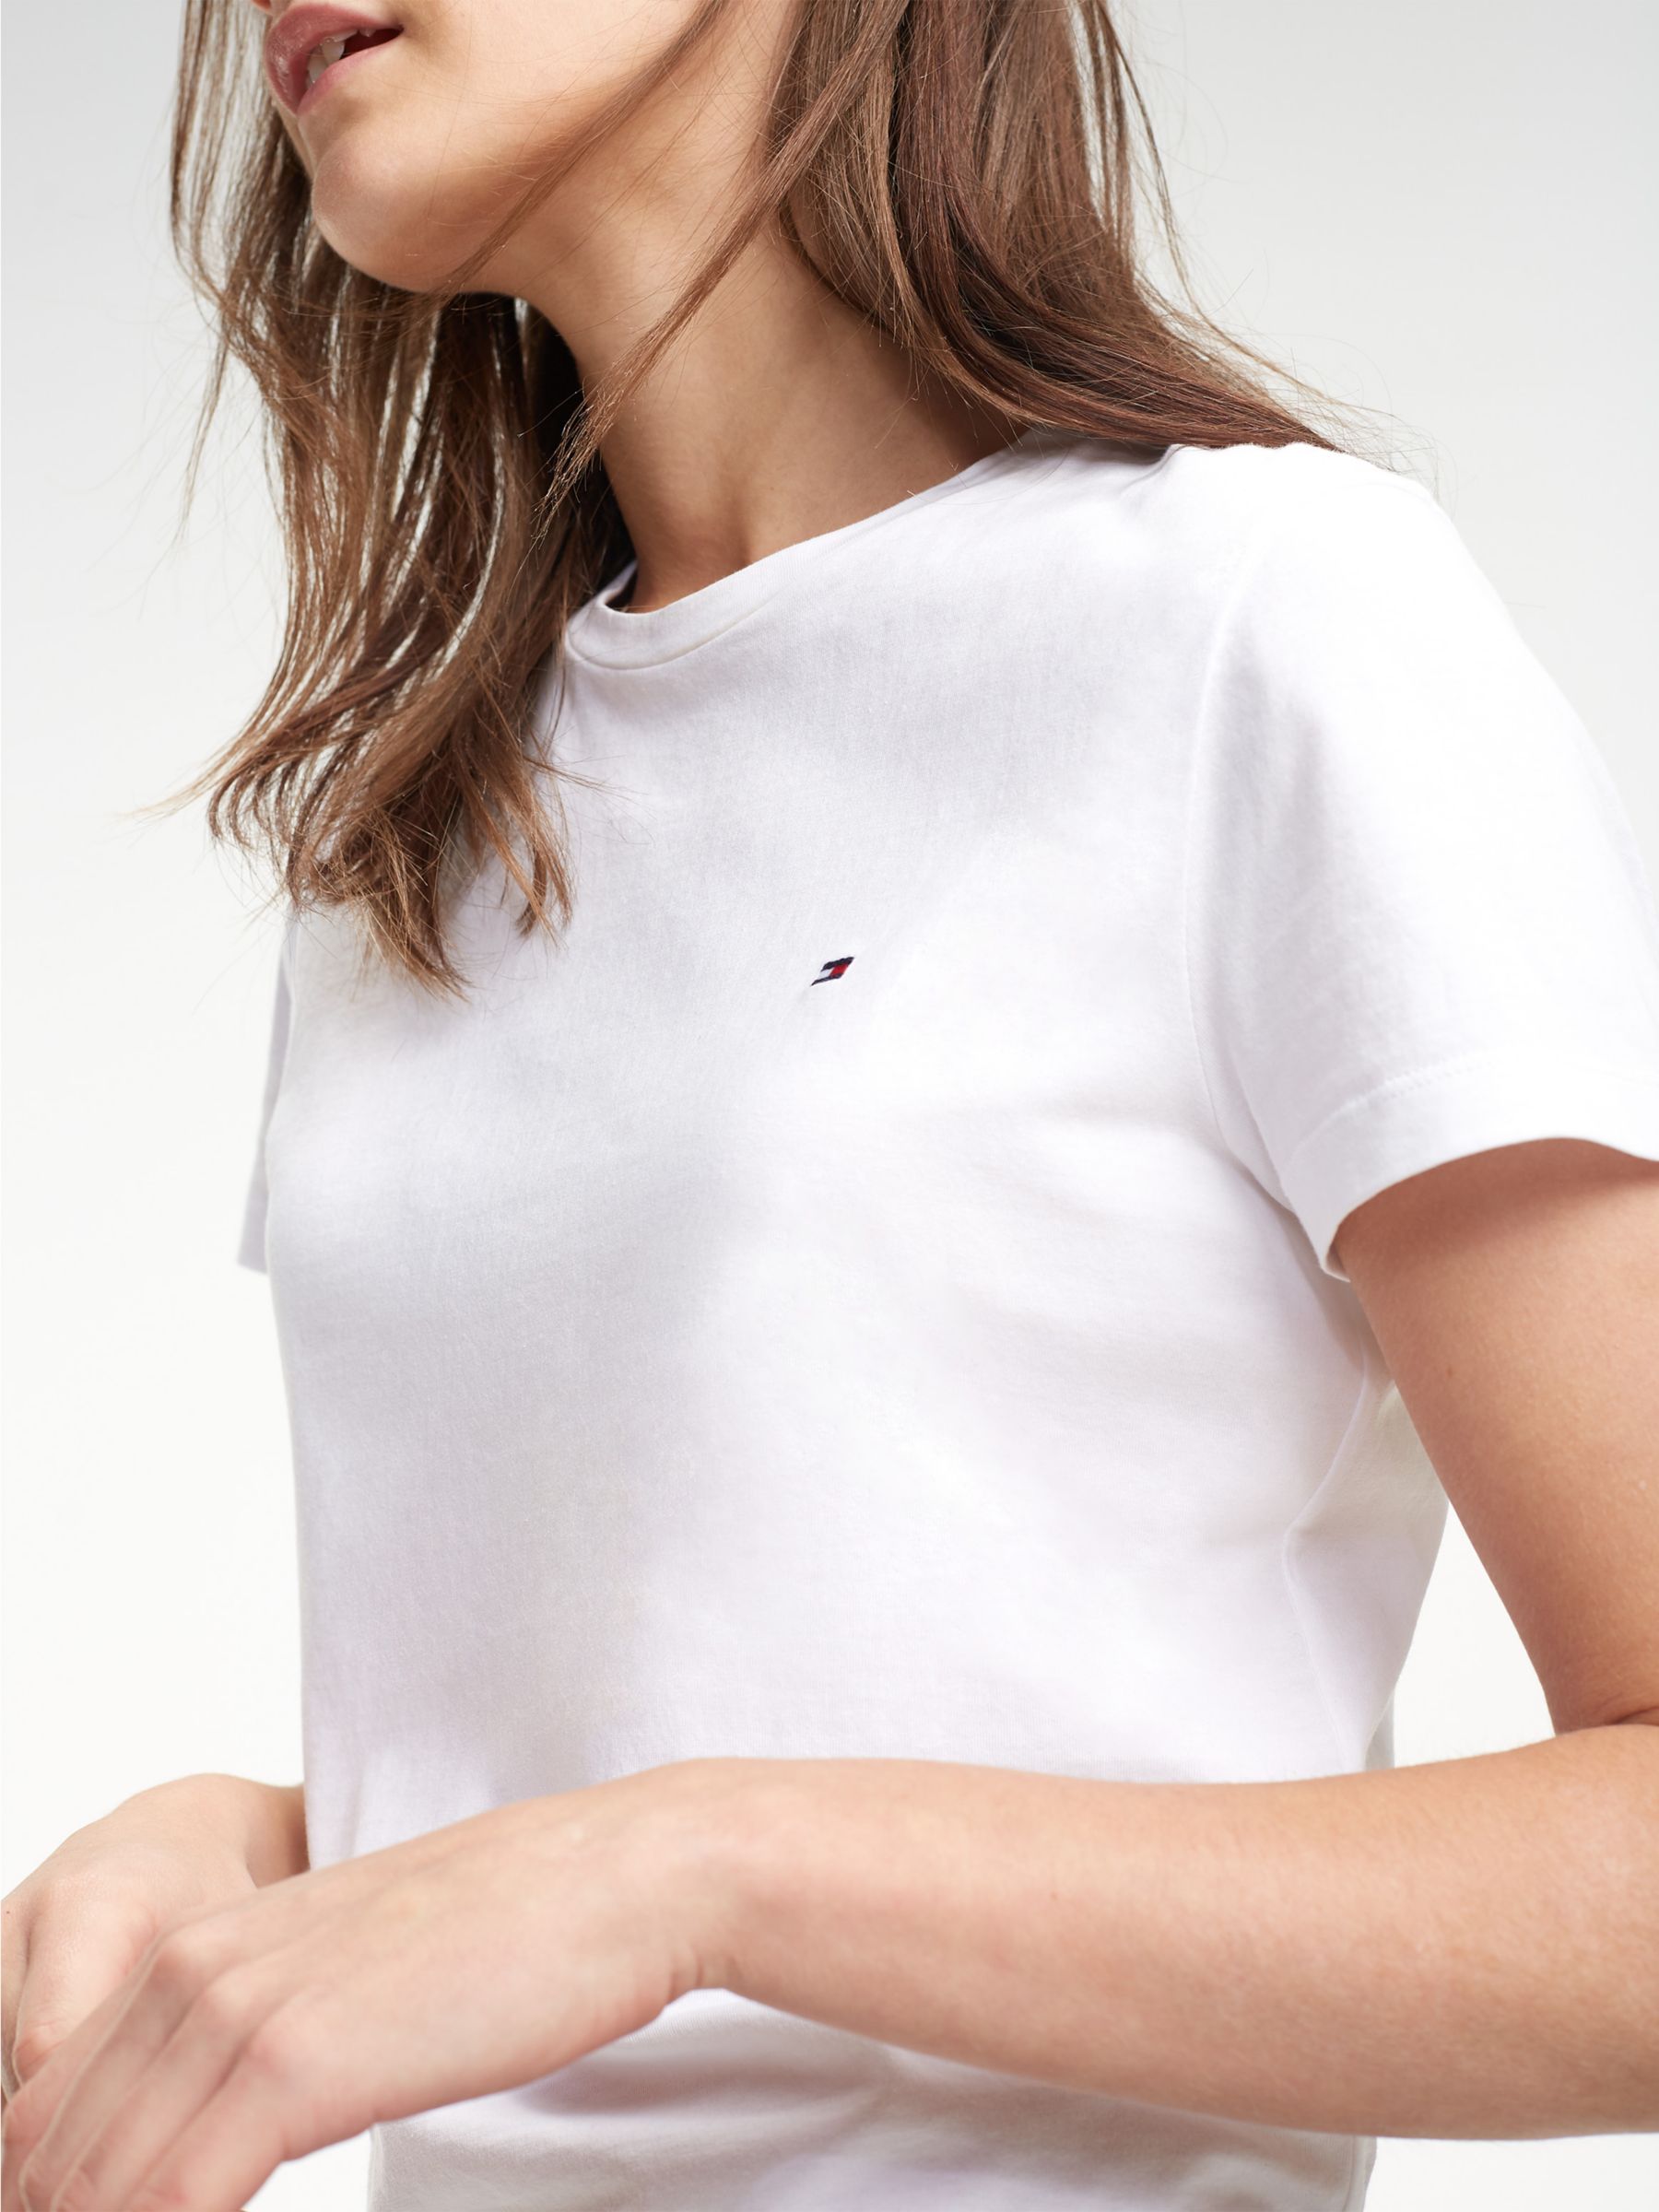 Tommy Hilfiger womens T-shirt, white - Buy online! HERE